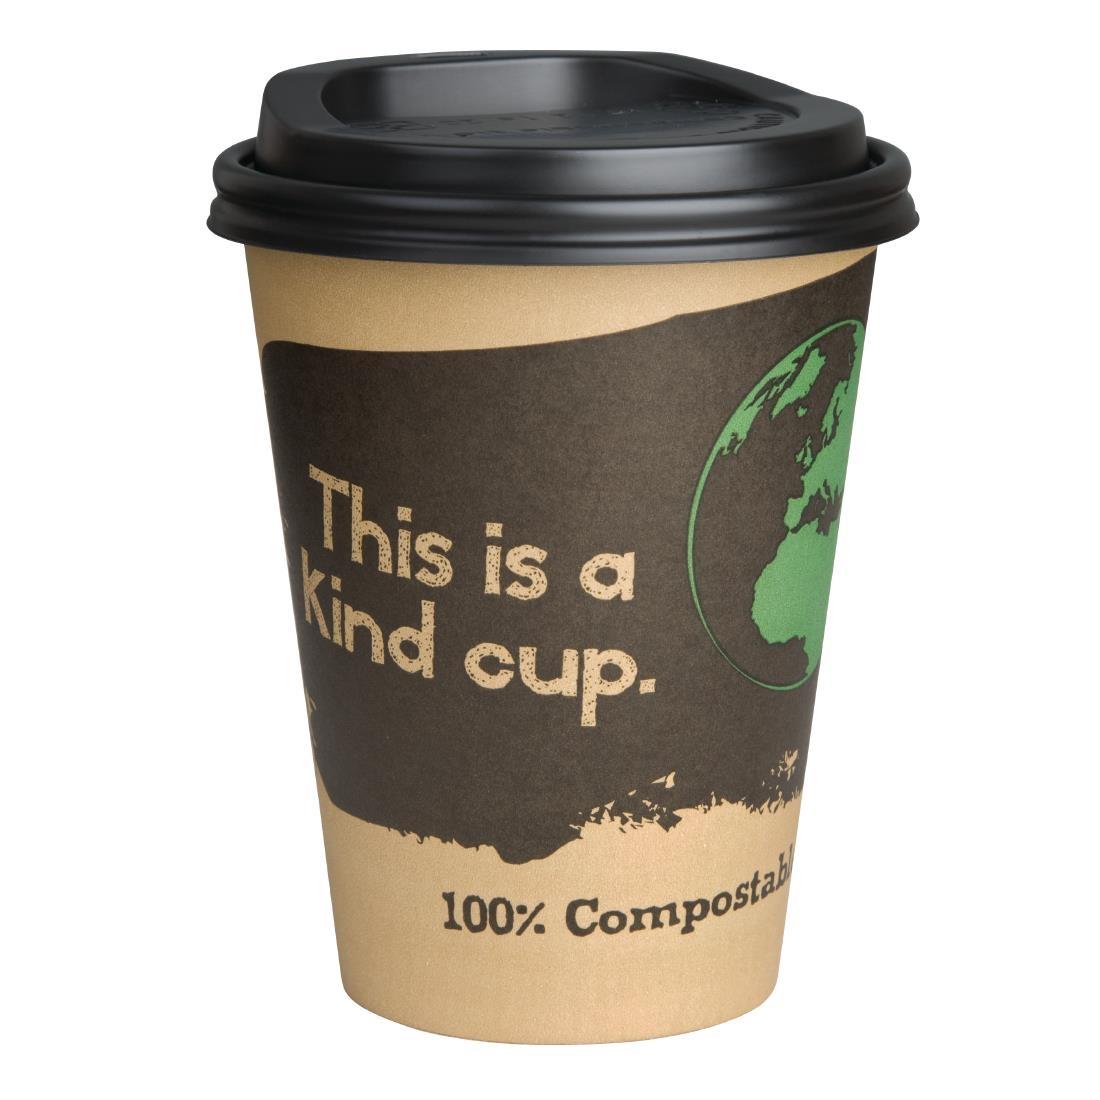 Fiesta Green 12oz Compostable Hot Cups and Lids Bundle (Pack of 1000) - SA486  - 2